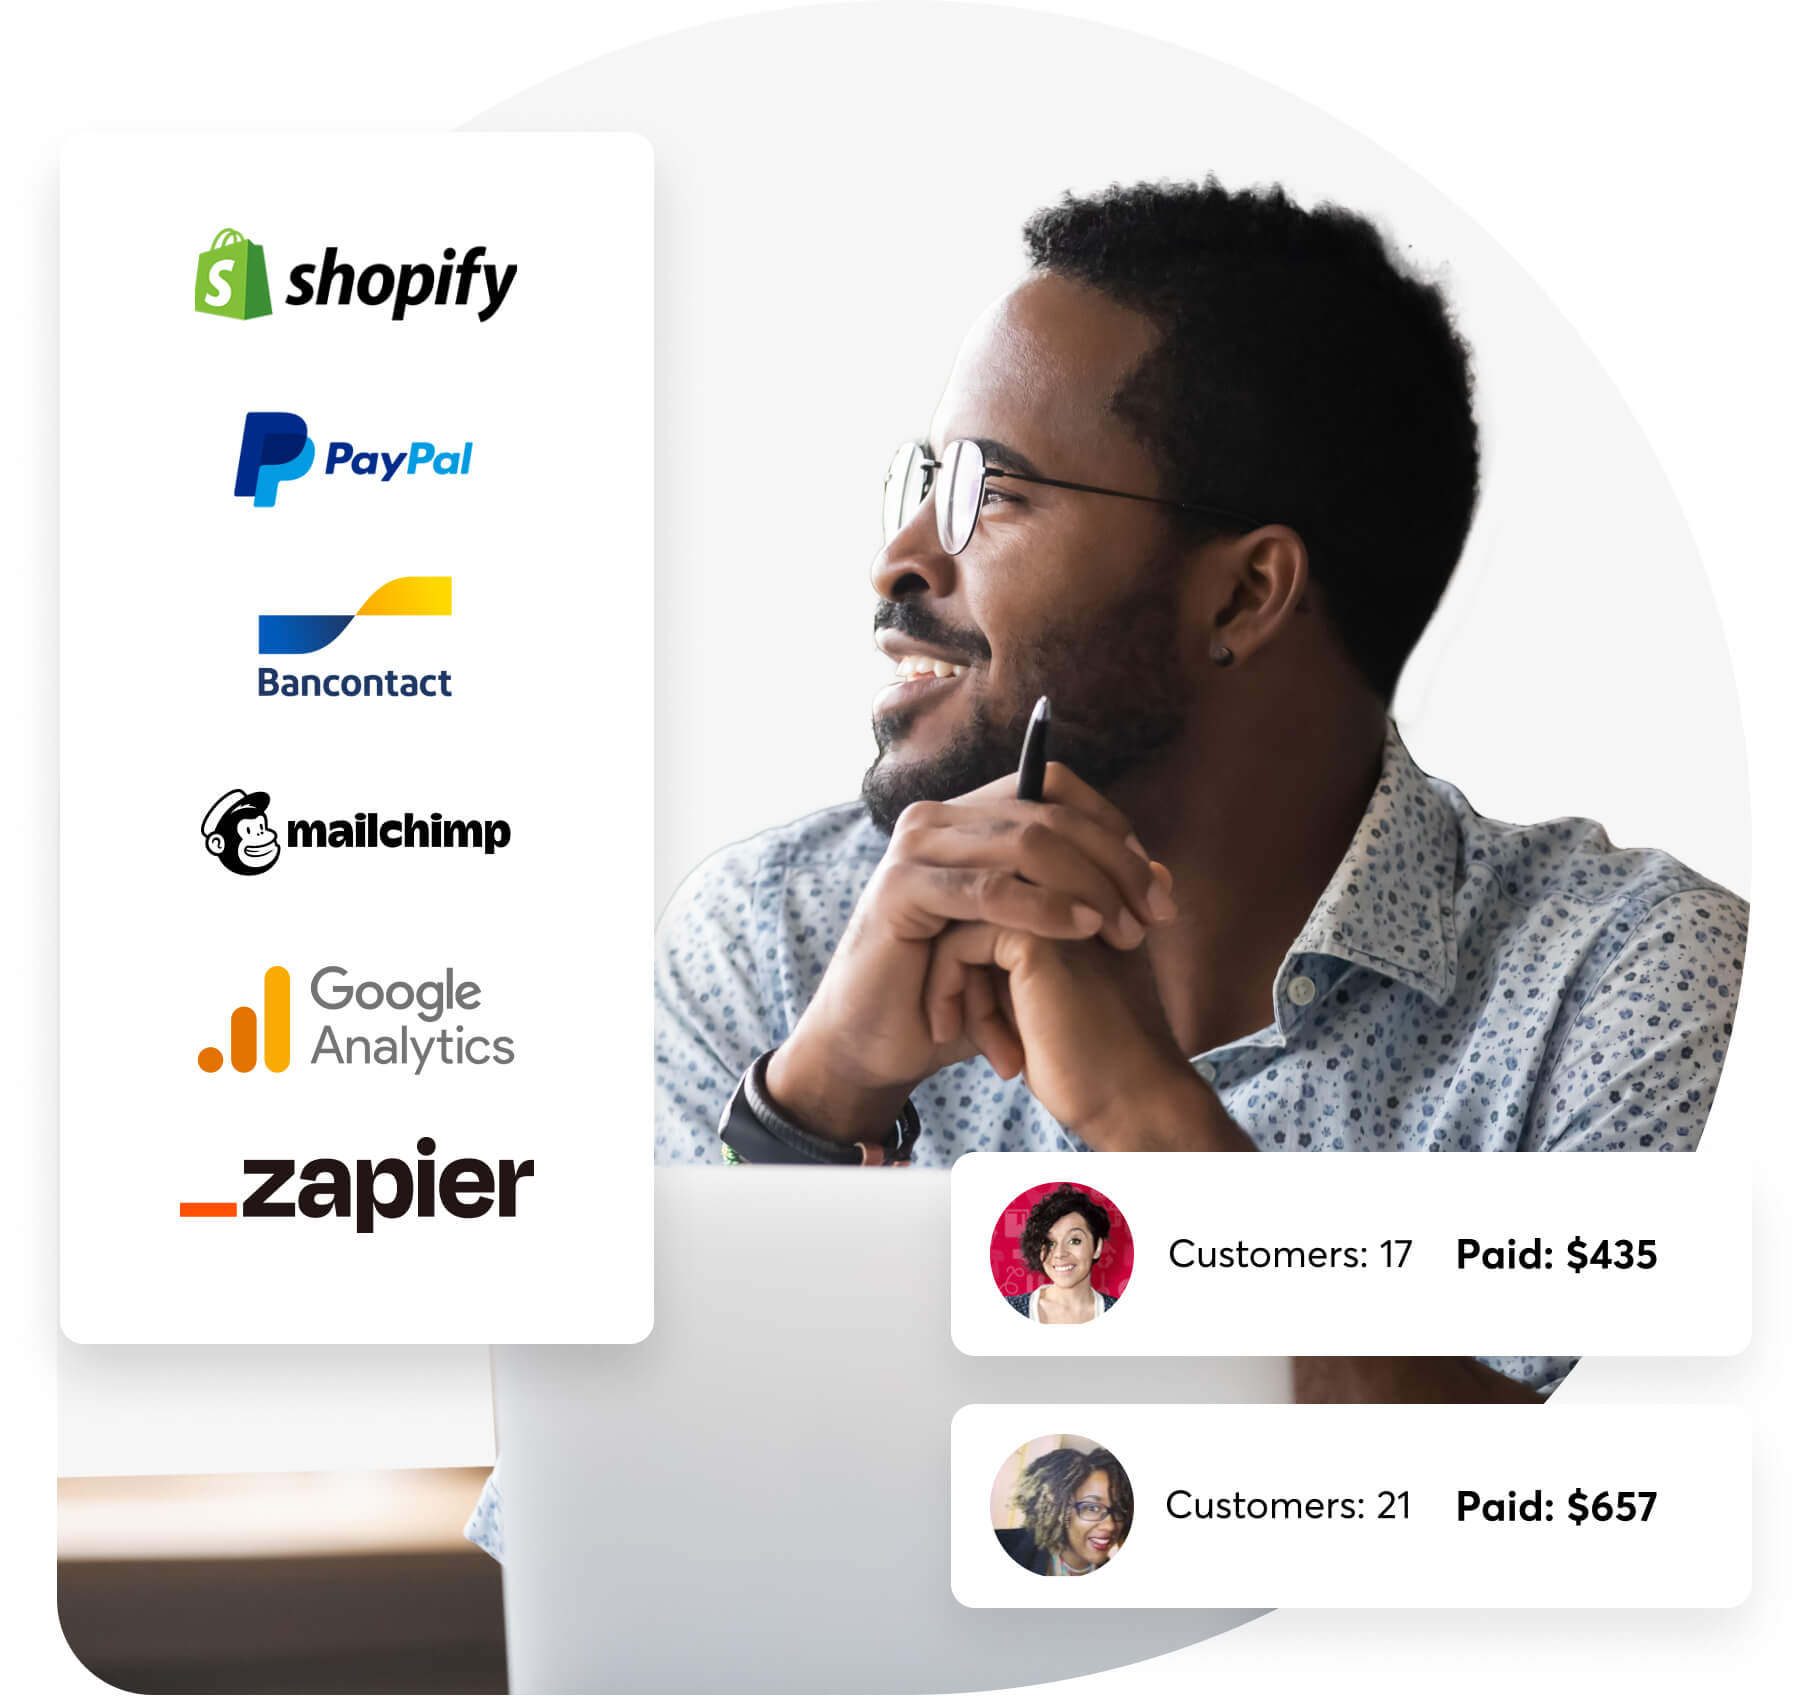 Connect with the right tools for your coaching business: Shopify, Paypal, Bancontact, Mailchimp, Google Analytics, Zapier.